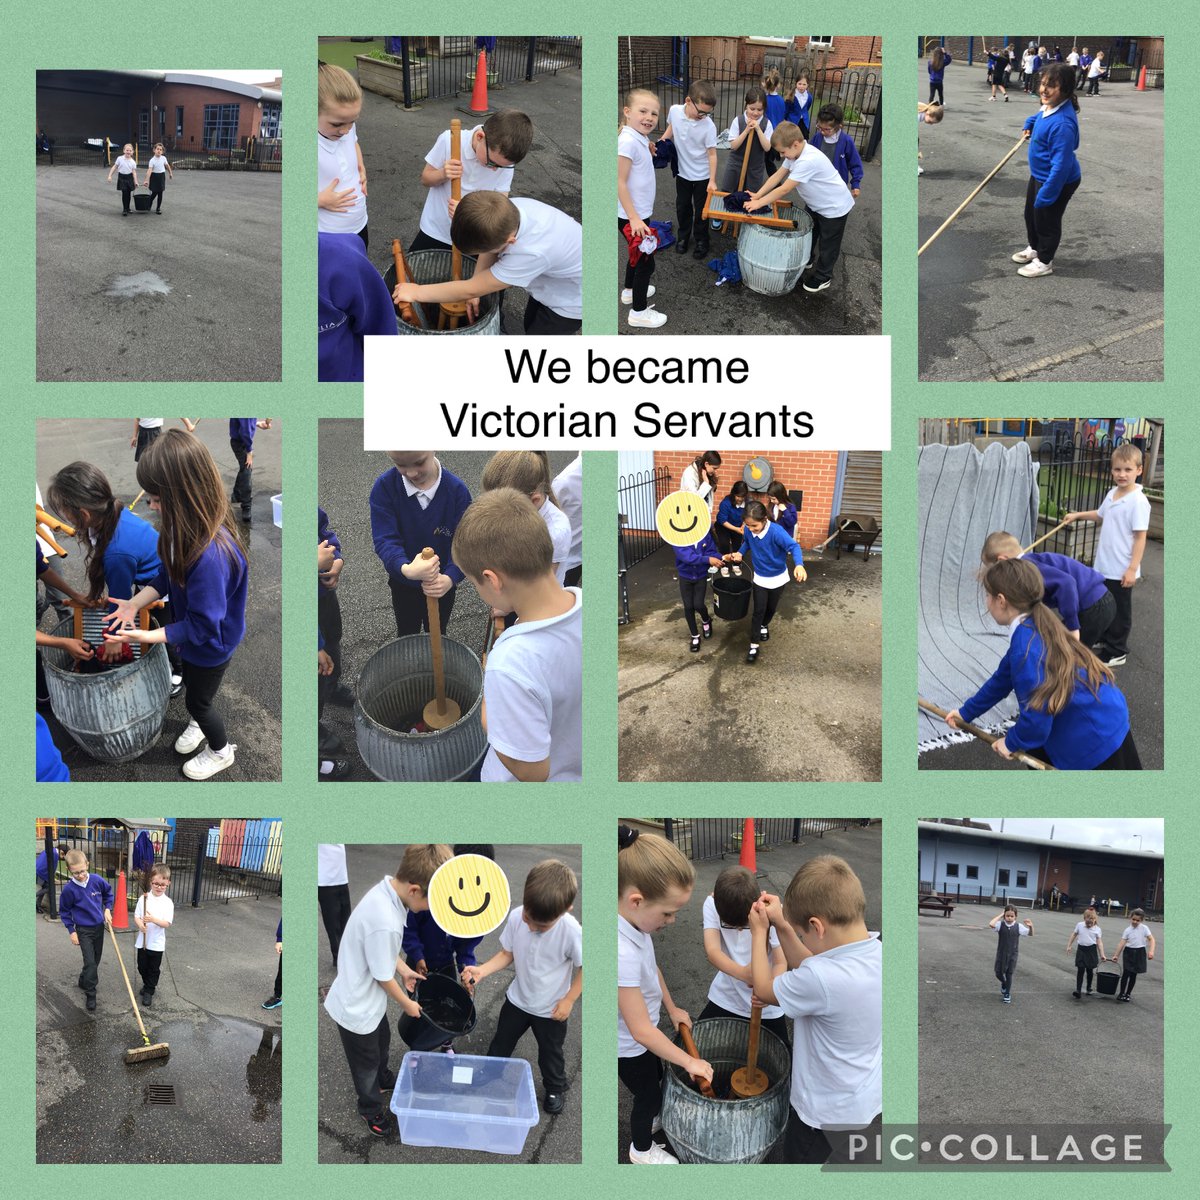 Yesterday we became Victorian servants. We had to go and collect water for a bath with lots of walking with heavy buckets. We washed some clothes and hung them out to dry. We also bashed a rug to make sure it was clean. It was lots of hard work! @DeltaStrand